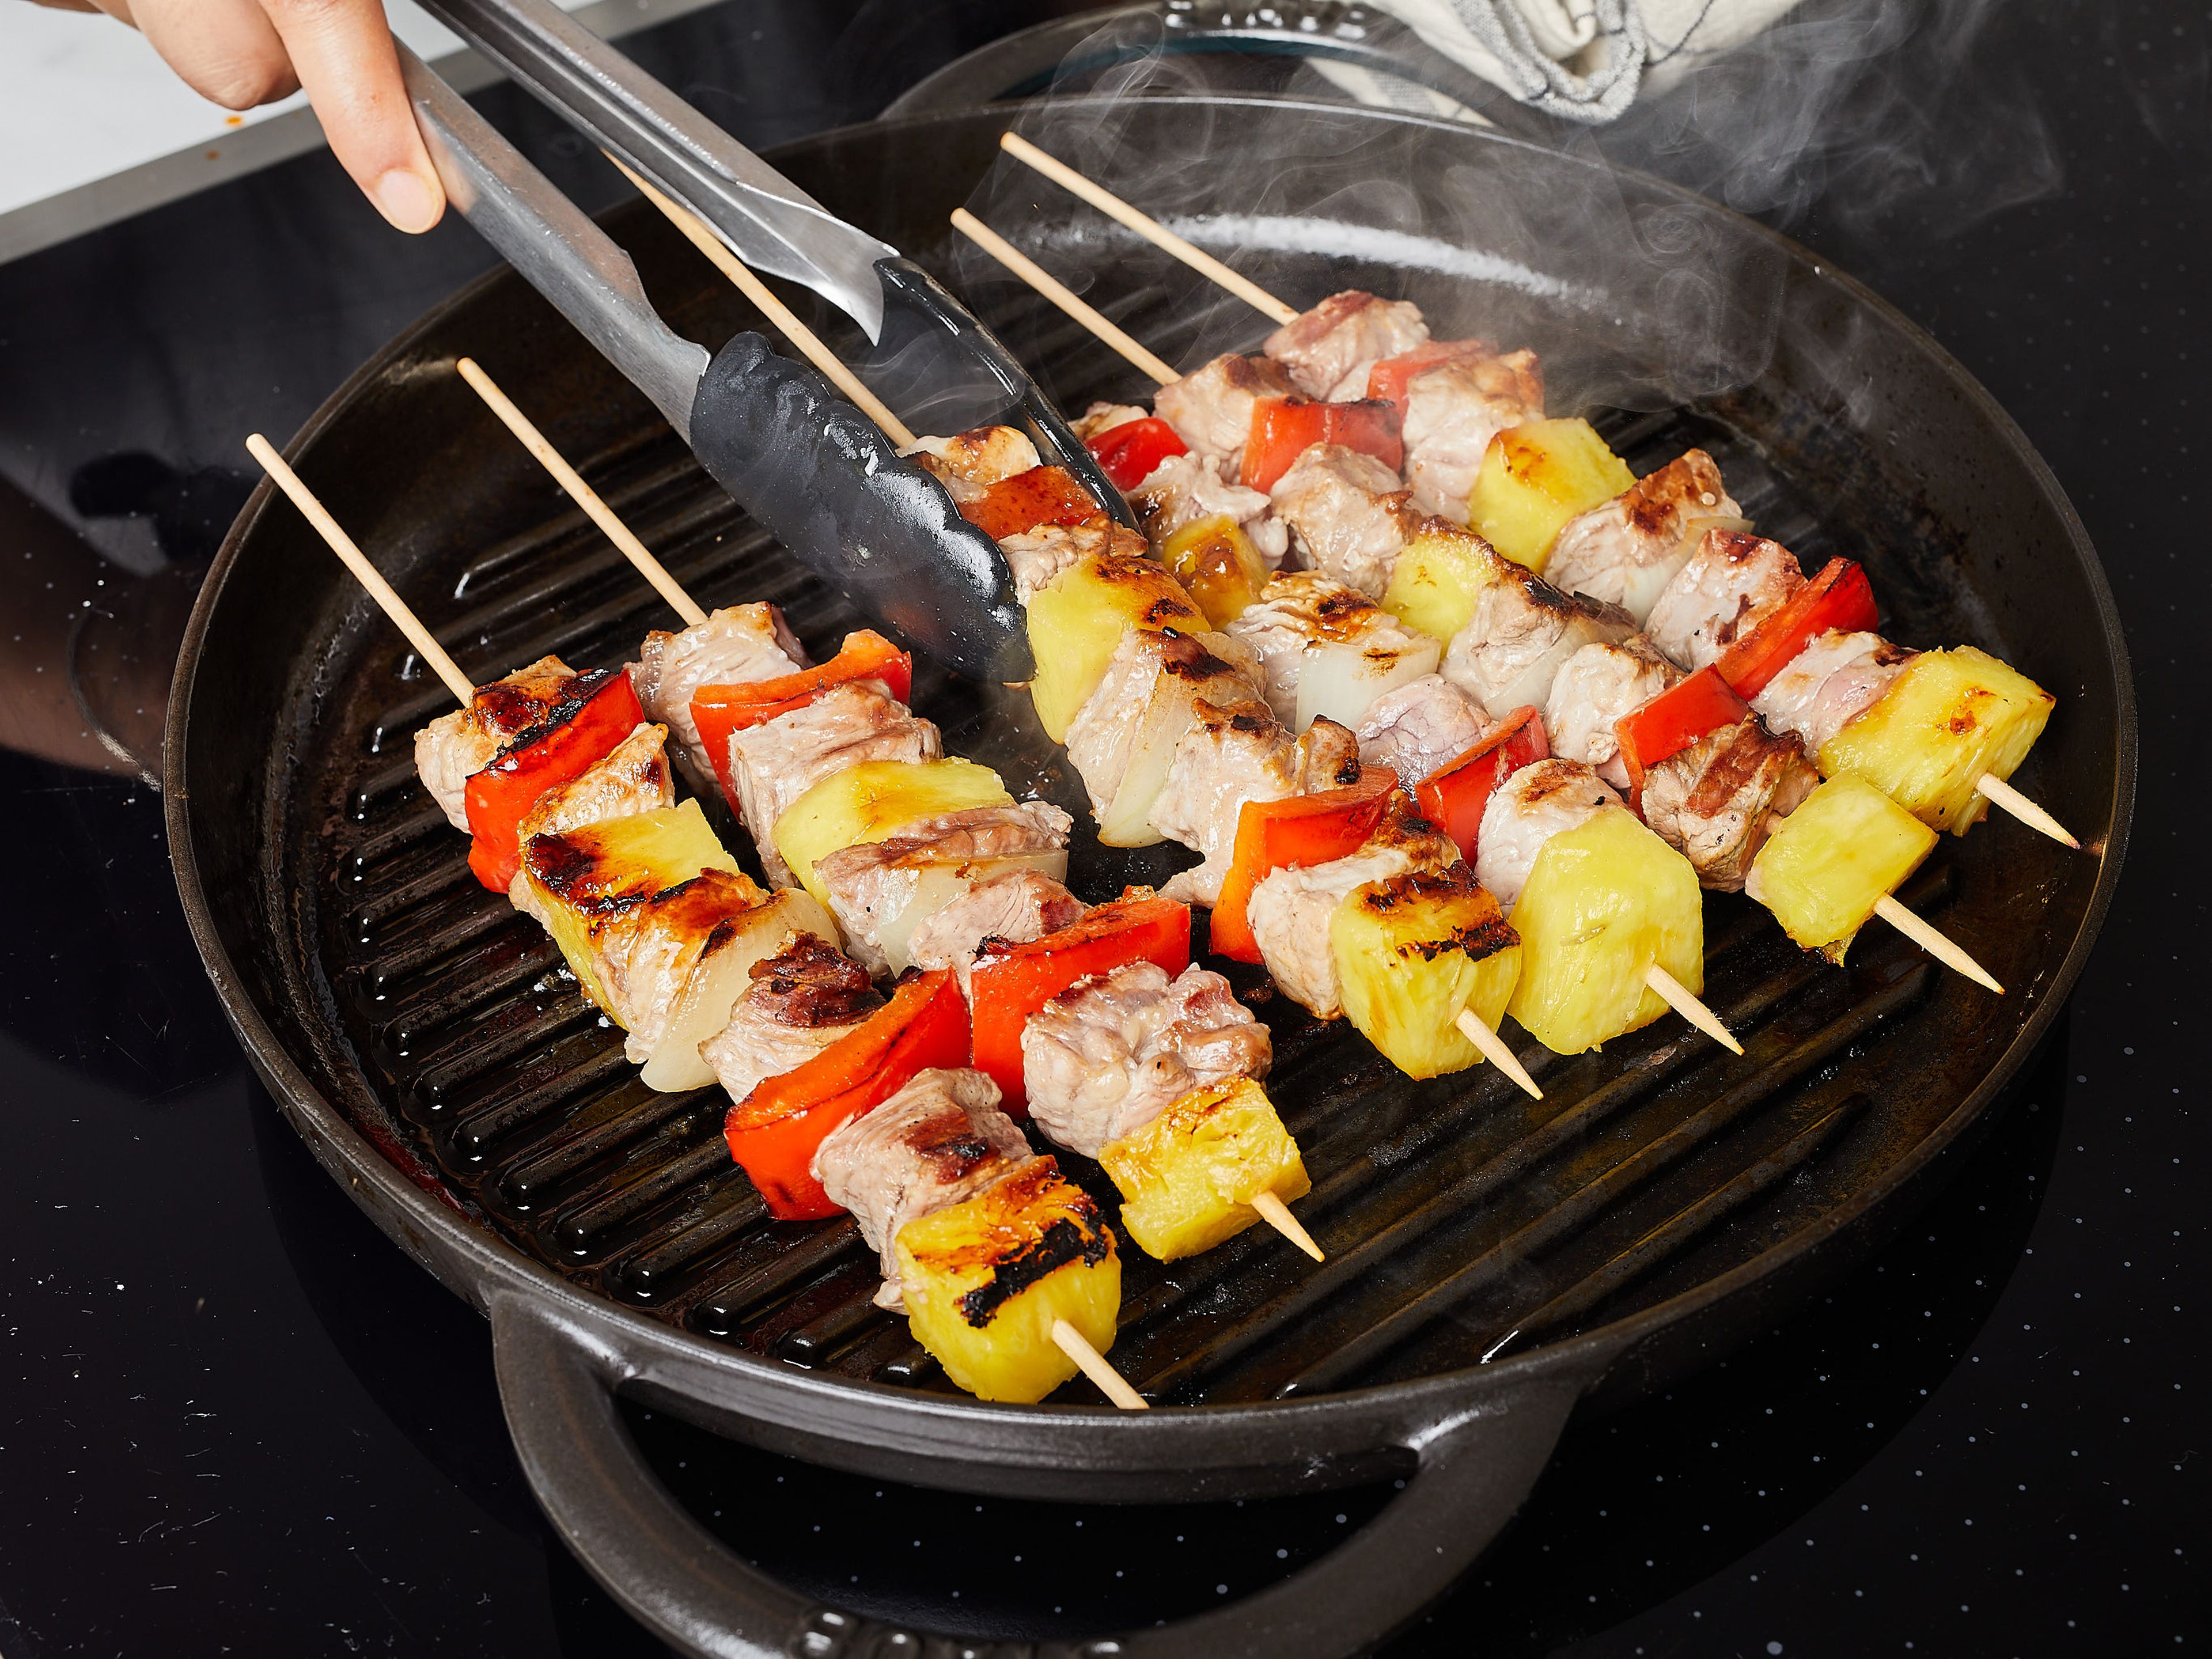 Meanwhile, heat the grill or grill pan. Season the skewers with a little salt and sear on all sides, about 3-4 mins. per side, until the meat is cooked through. Serve the skewers alongside the sauce and enjoy!